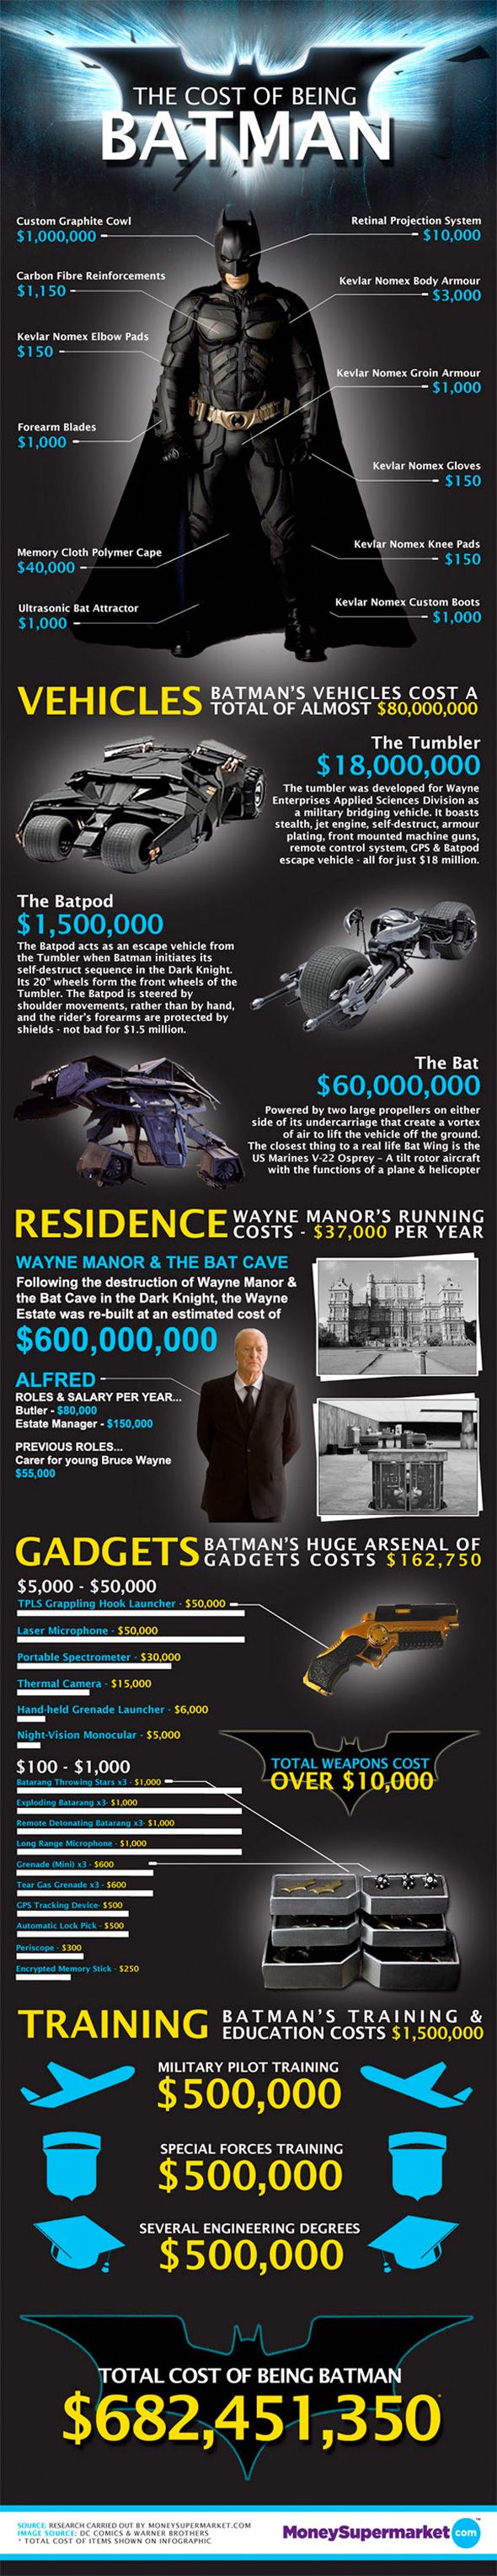 The Cost of Being Batman Infographic